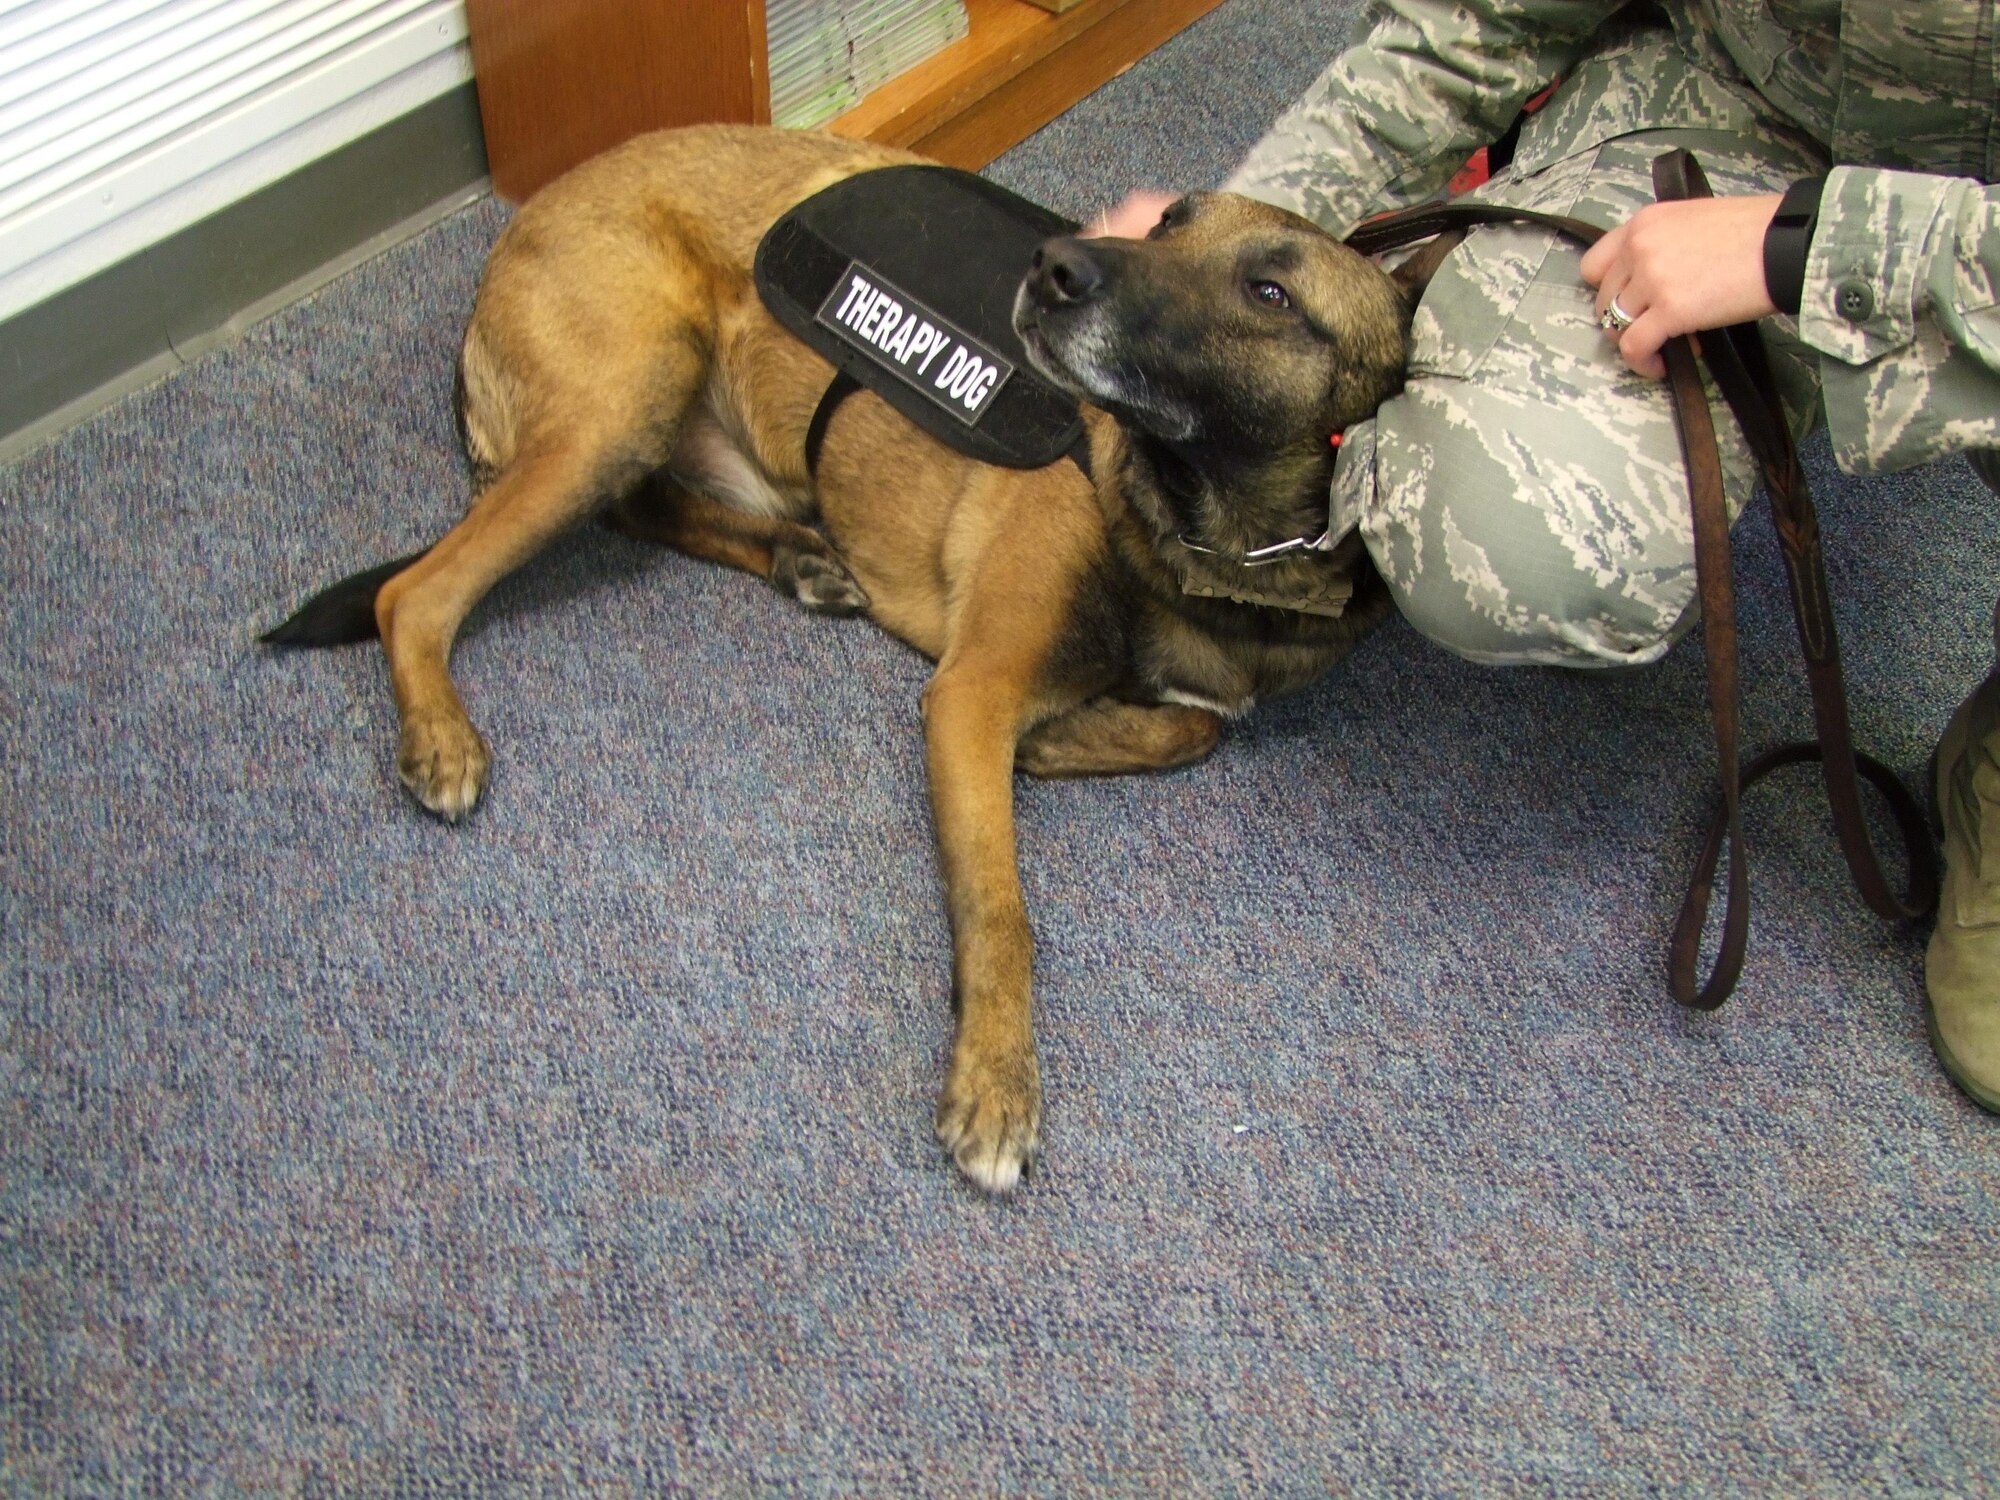 Sato, a 5-year-old Belgian Malinois, is a retired military working dog now serving as a therapy dog at the U.S. Air Force Academy, Colo. He previously served as a bomb dog for the 10th Security Forces Squadron. (U.S. Air Force photo/Amber Baillie) 
